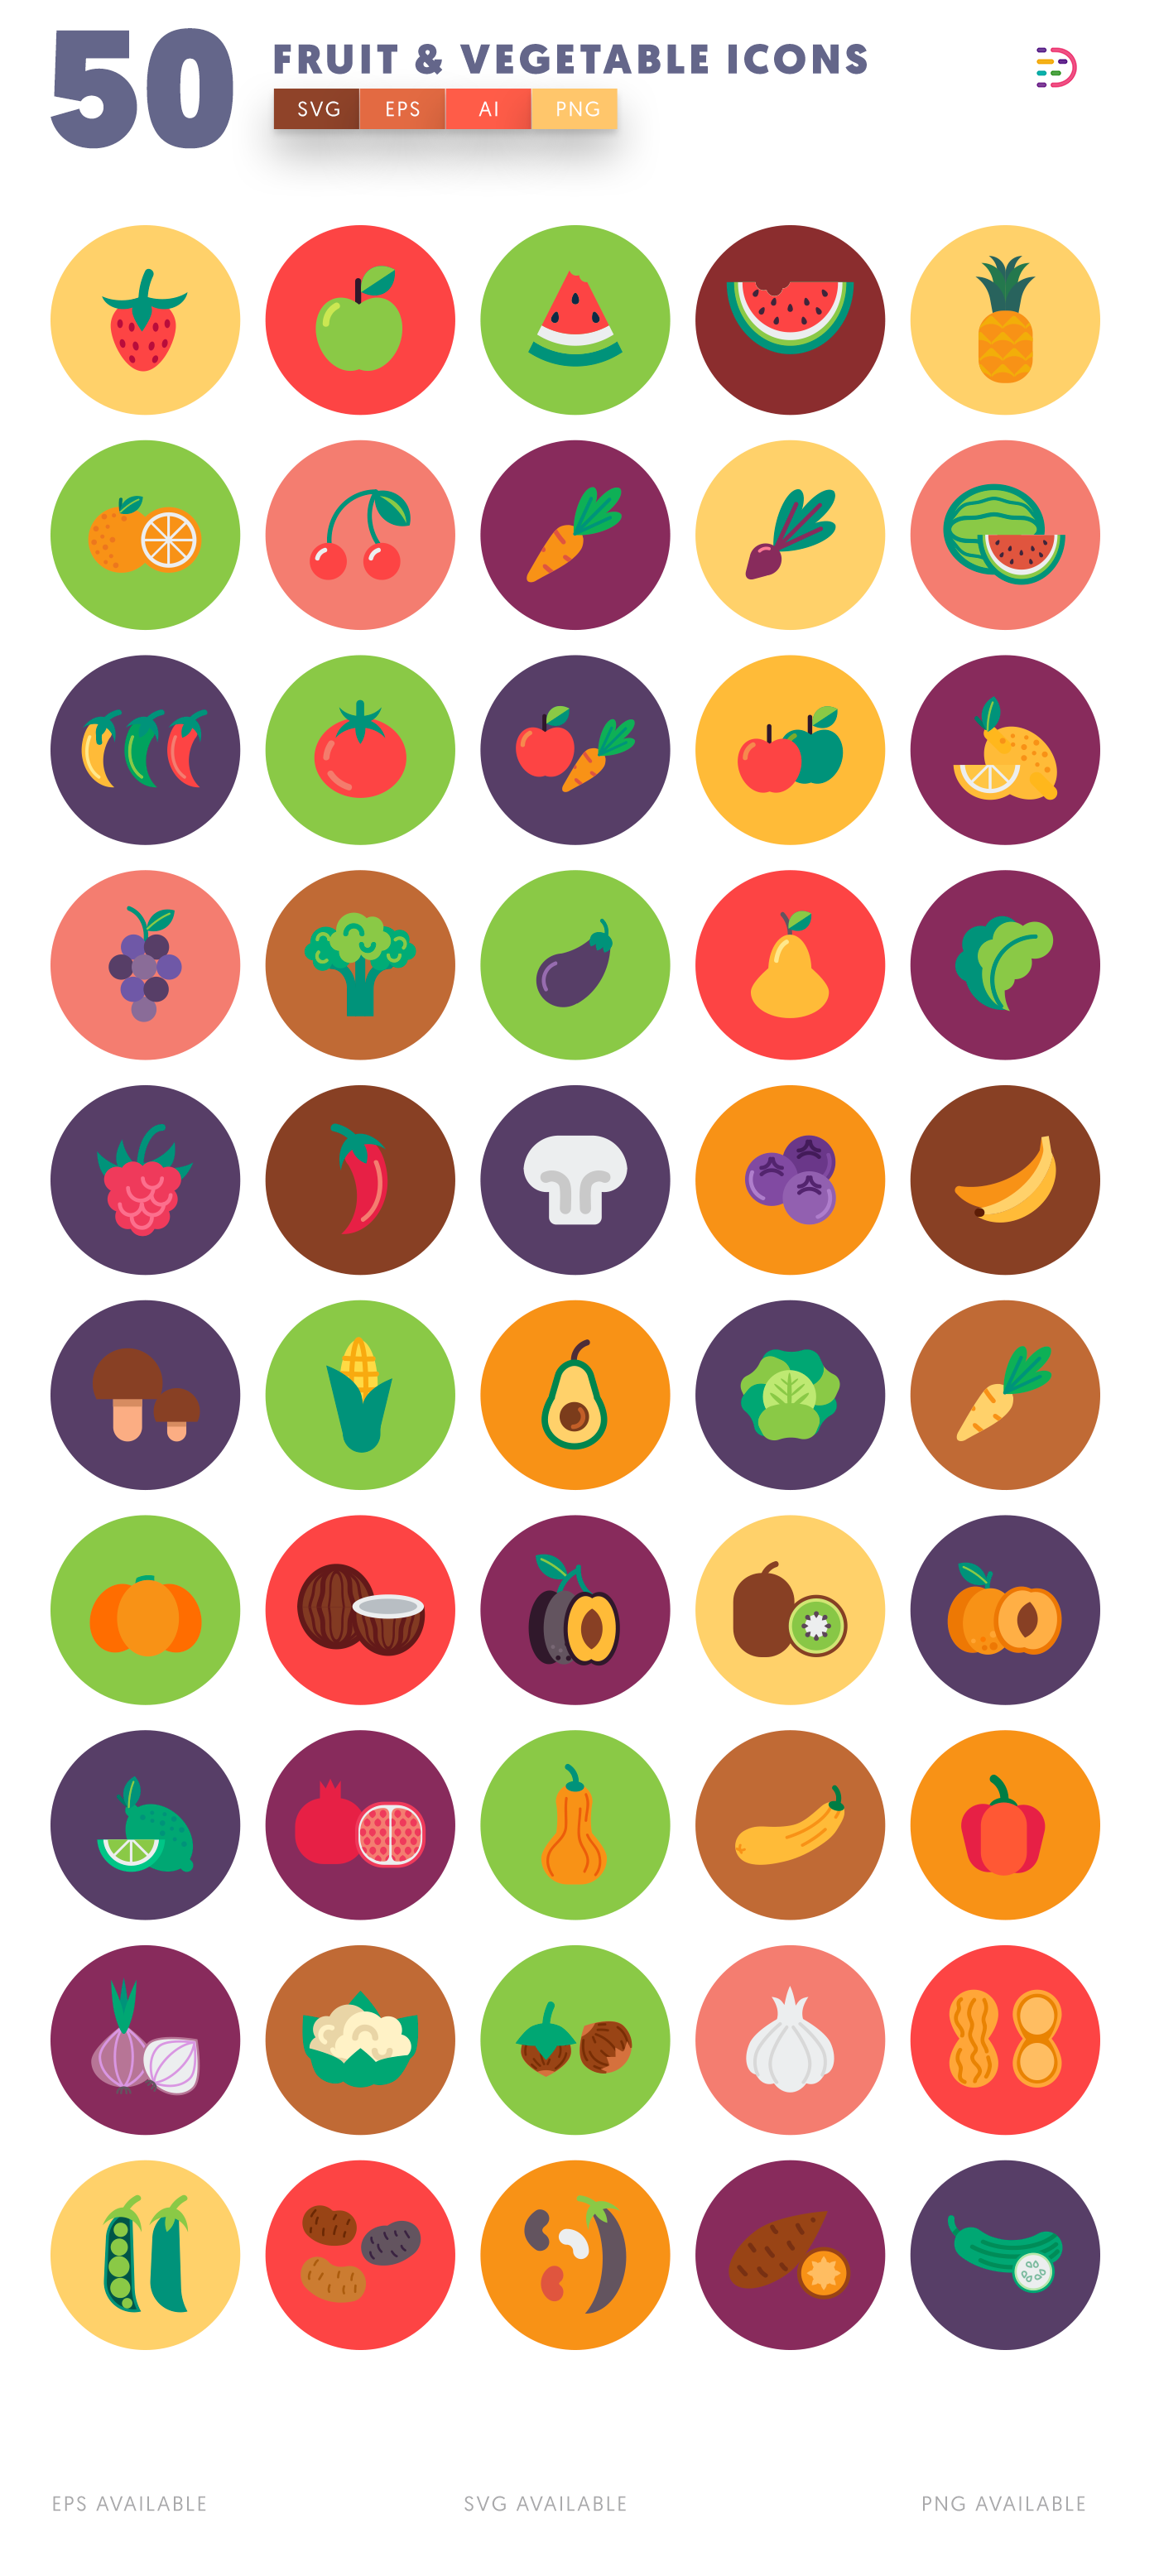 Design ready Fruits and Vegetable Icons